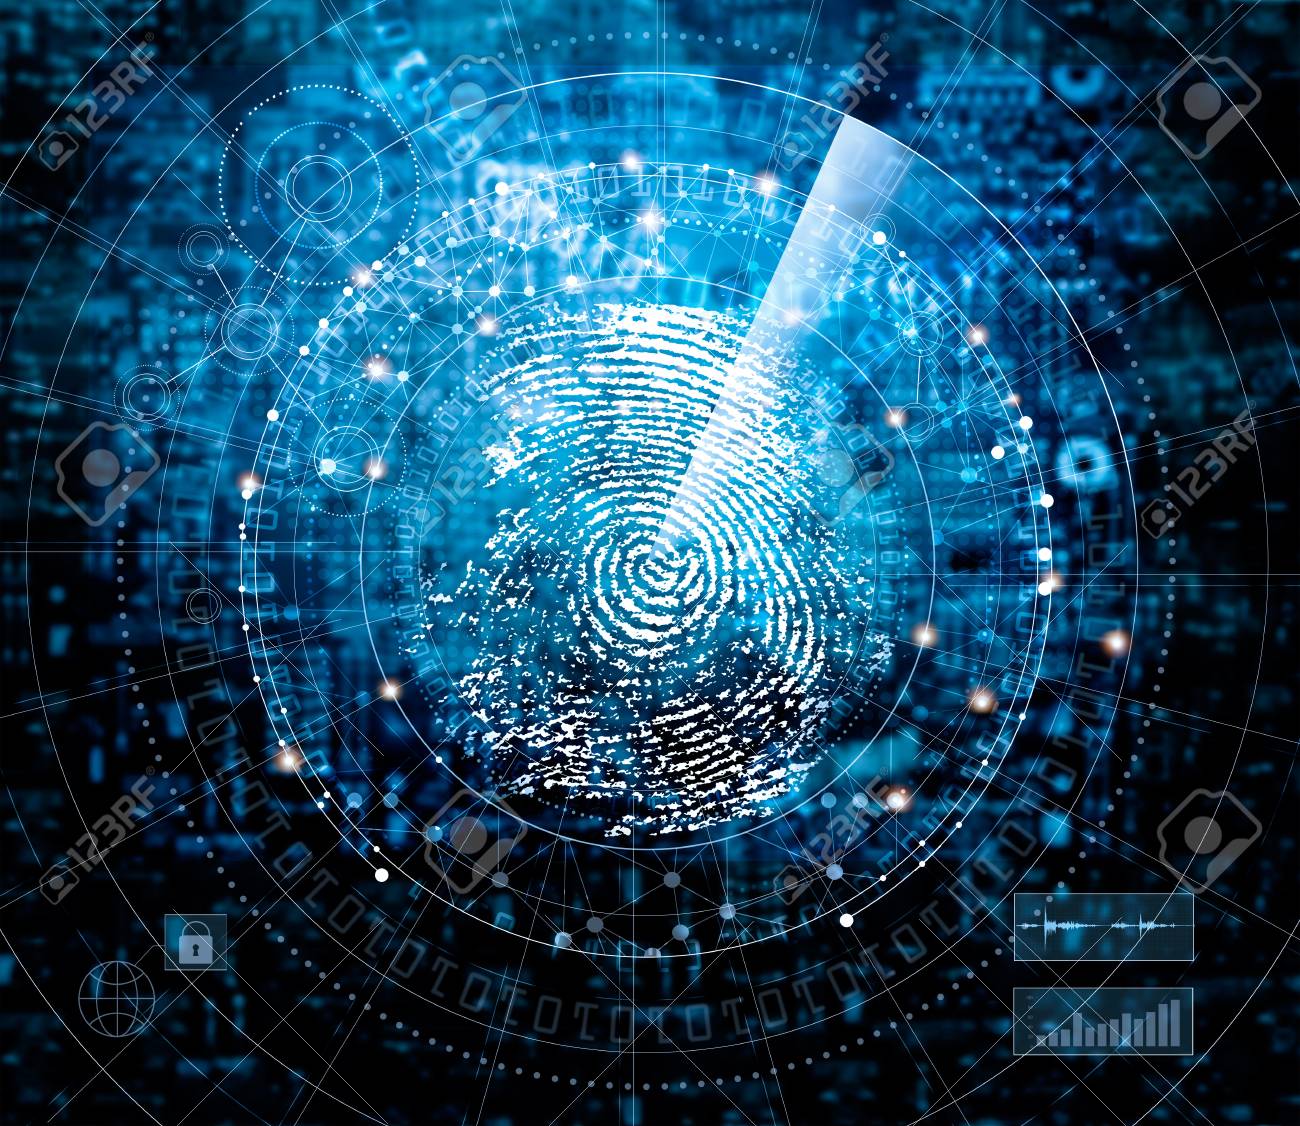 Fingerprint Scanning And Searching Identity Check On Blue Cyber